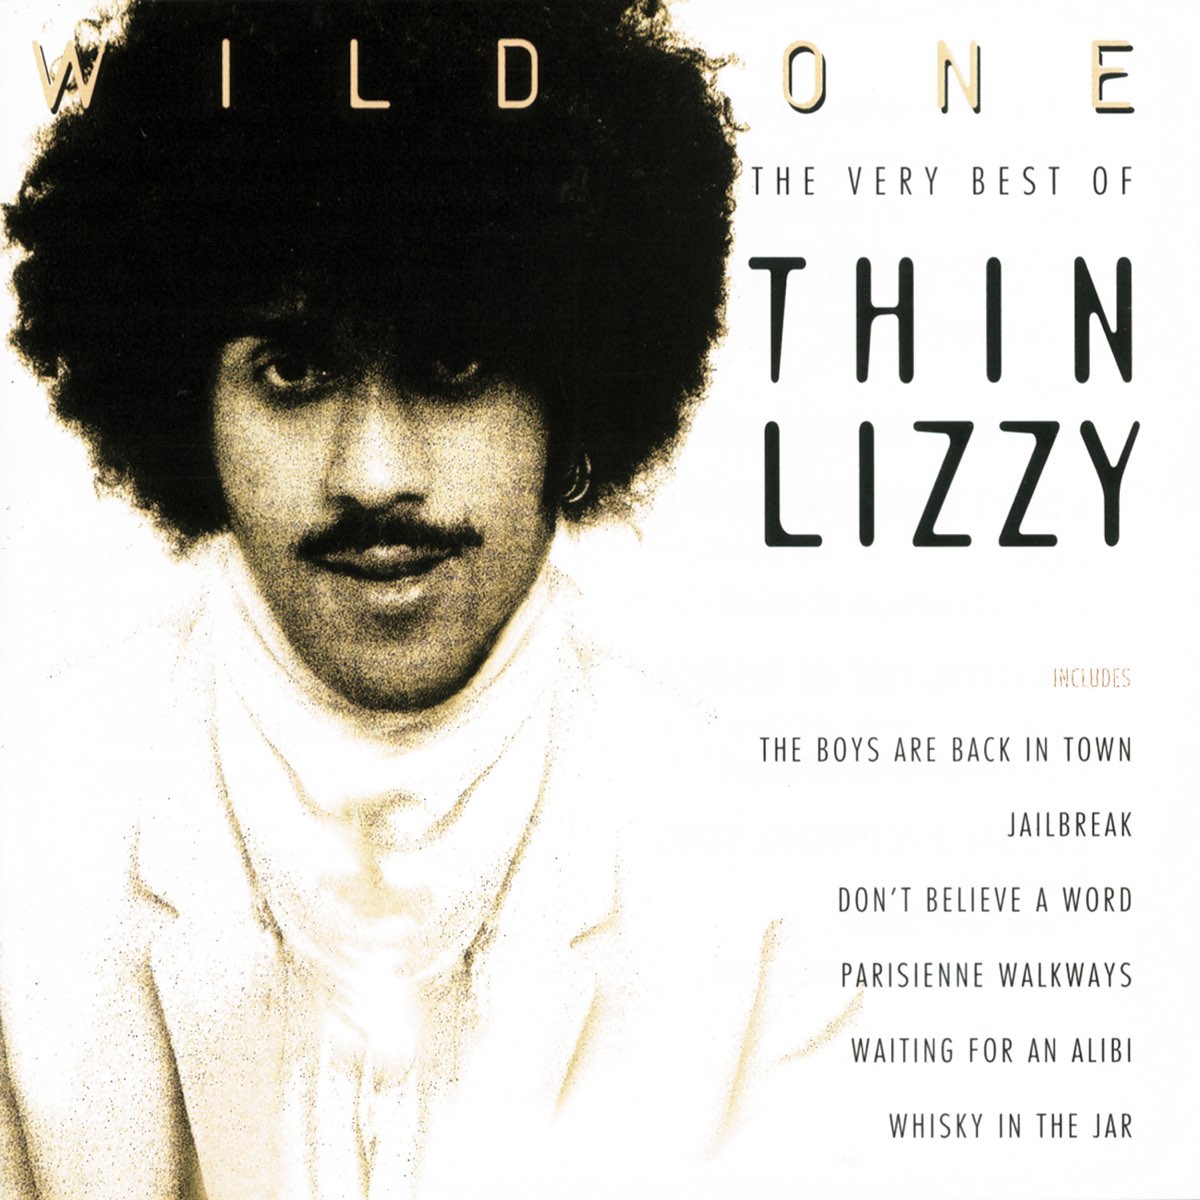 Wild One - The Very Best of Thin Lizzy by Thin Lizzy on Apple Music